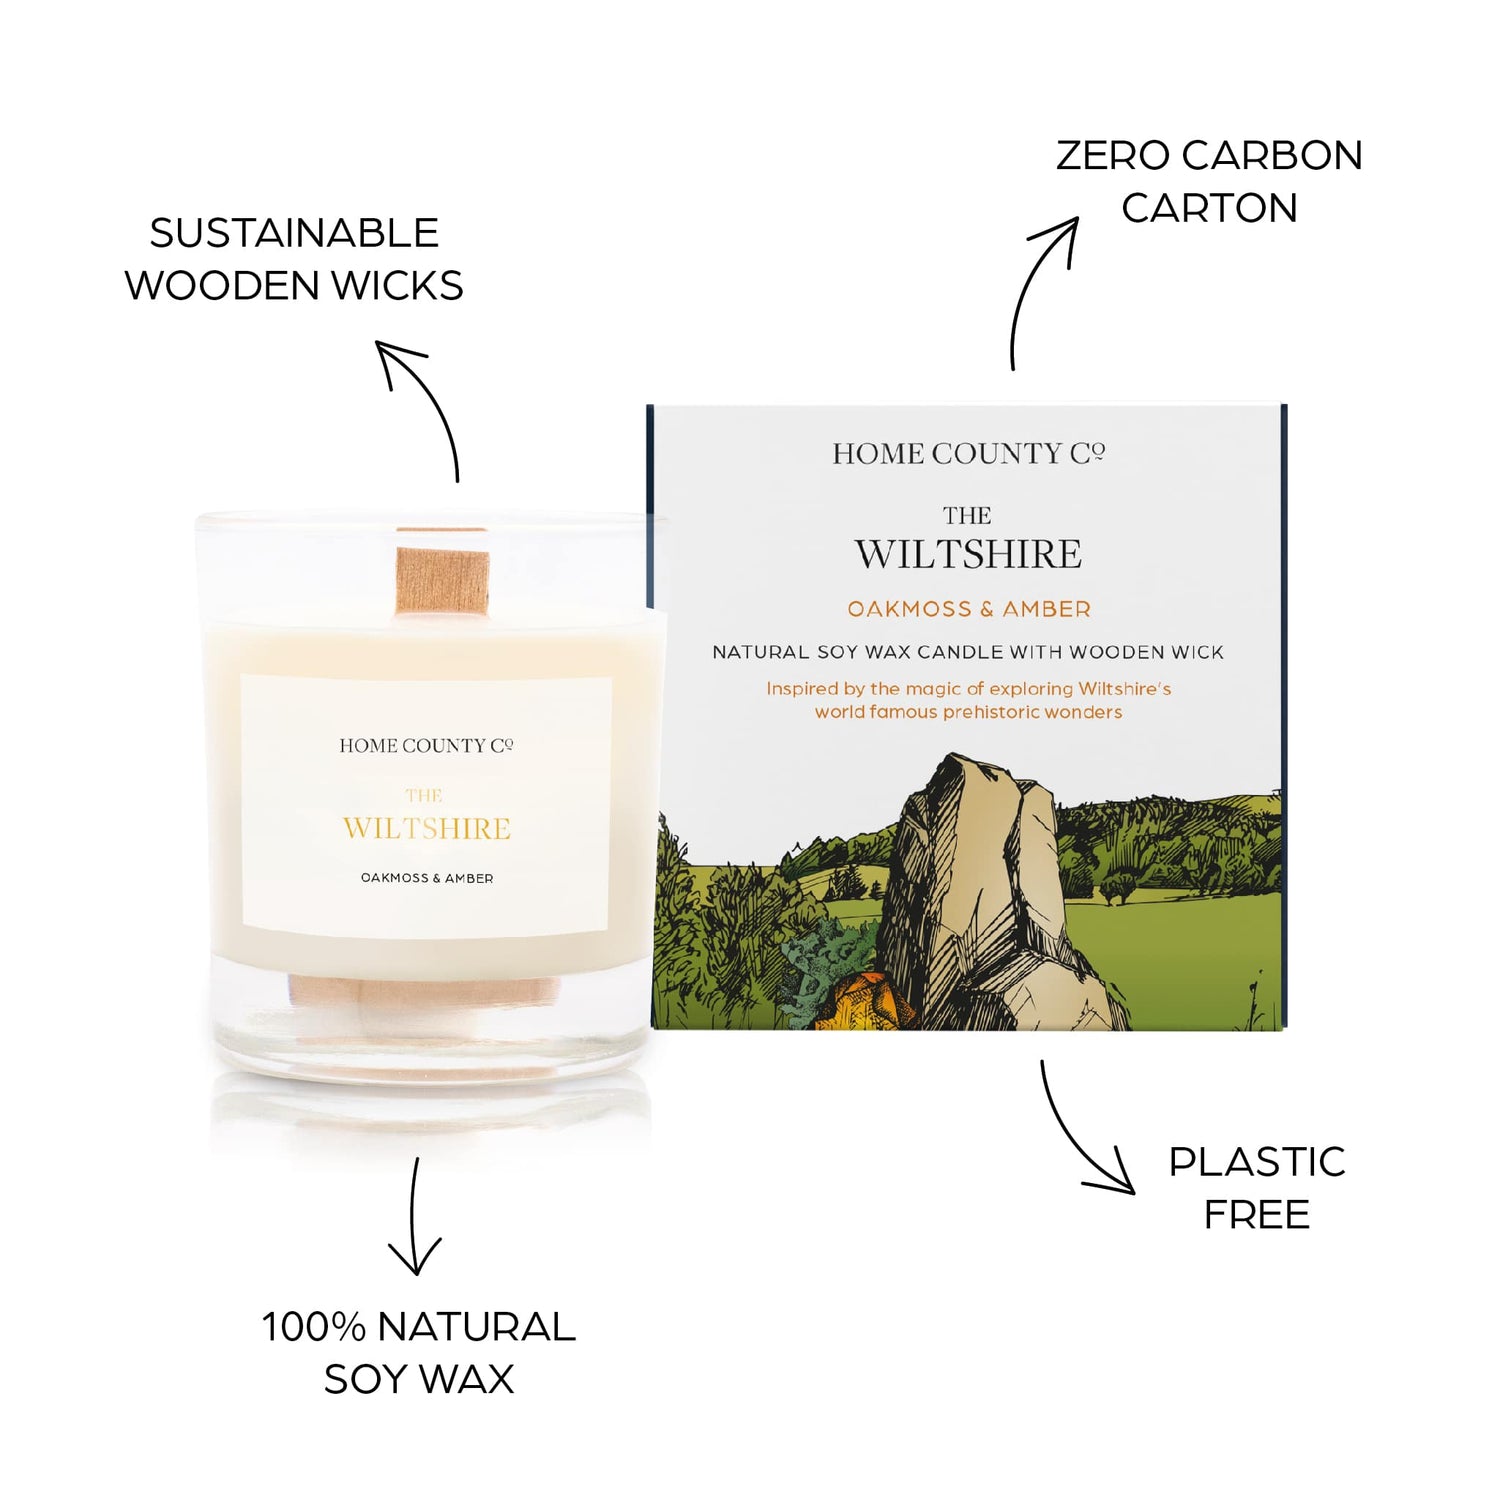 Sustainable candle credentials are shown around the earthy scented candle image - sustainable wooden wicks, zero carbon carton, 100% natural soy wax, plastic free